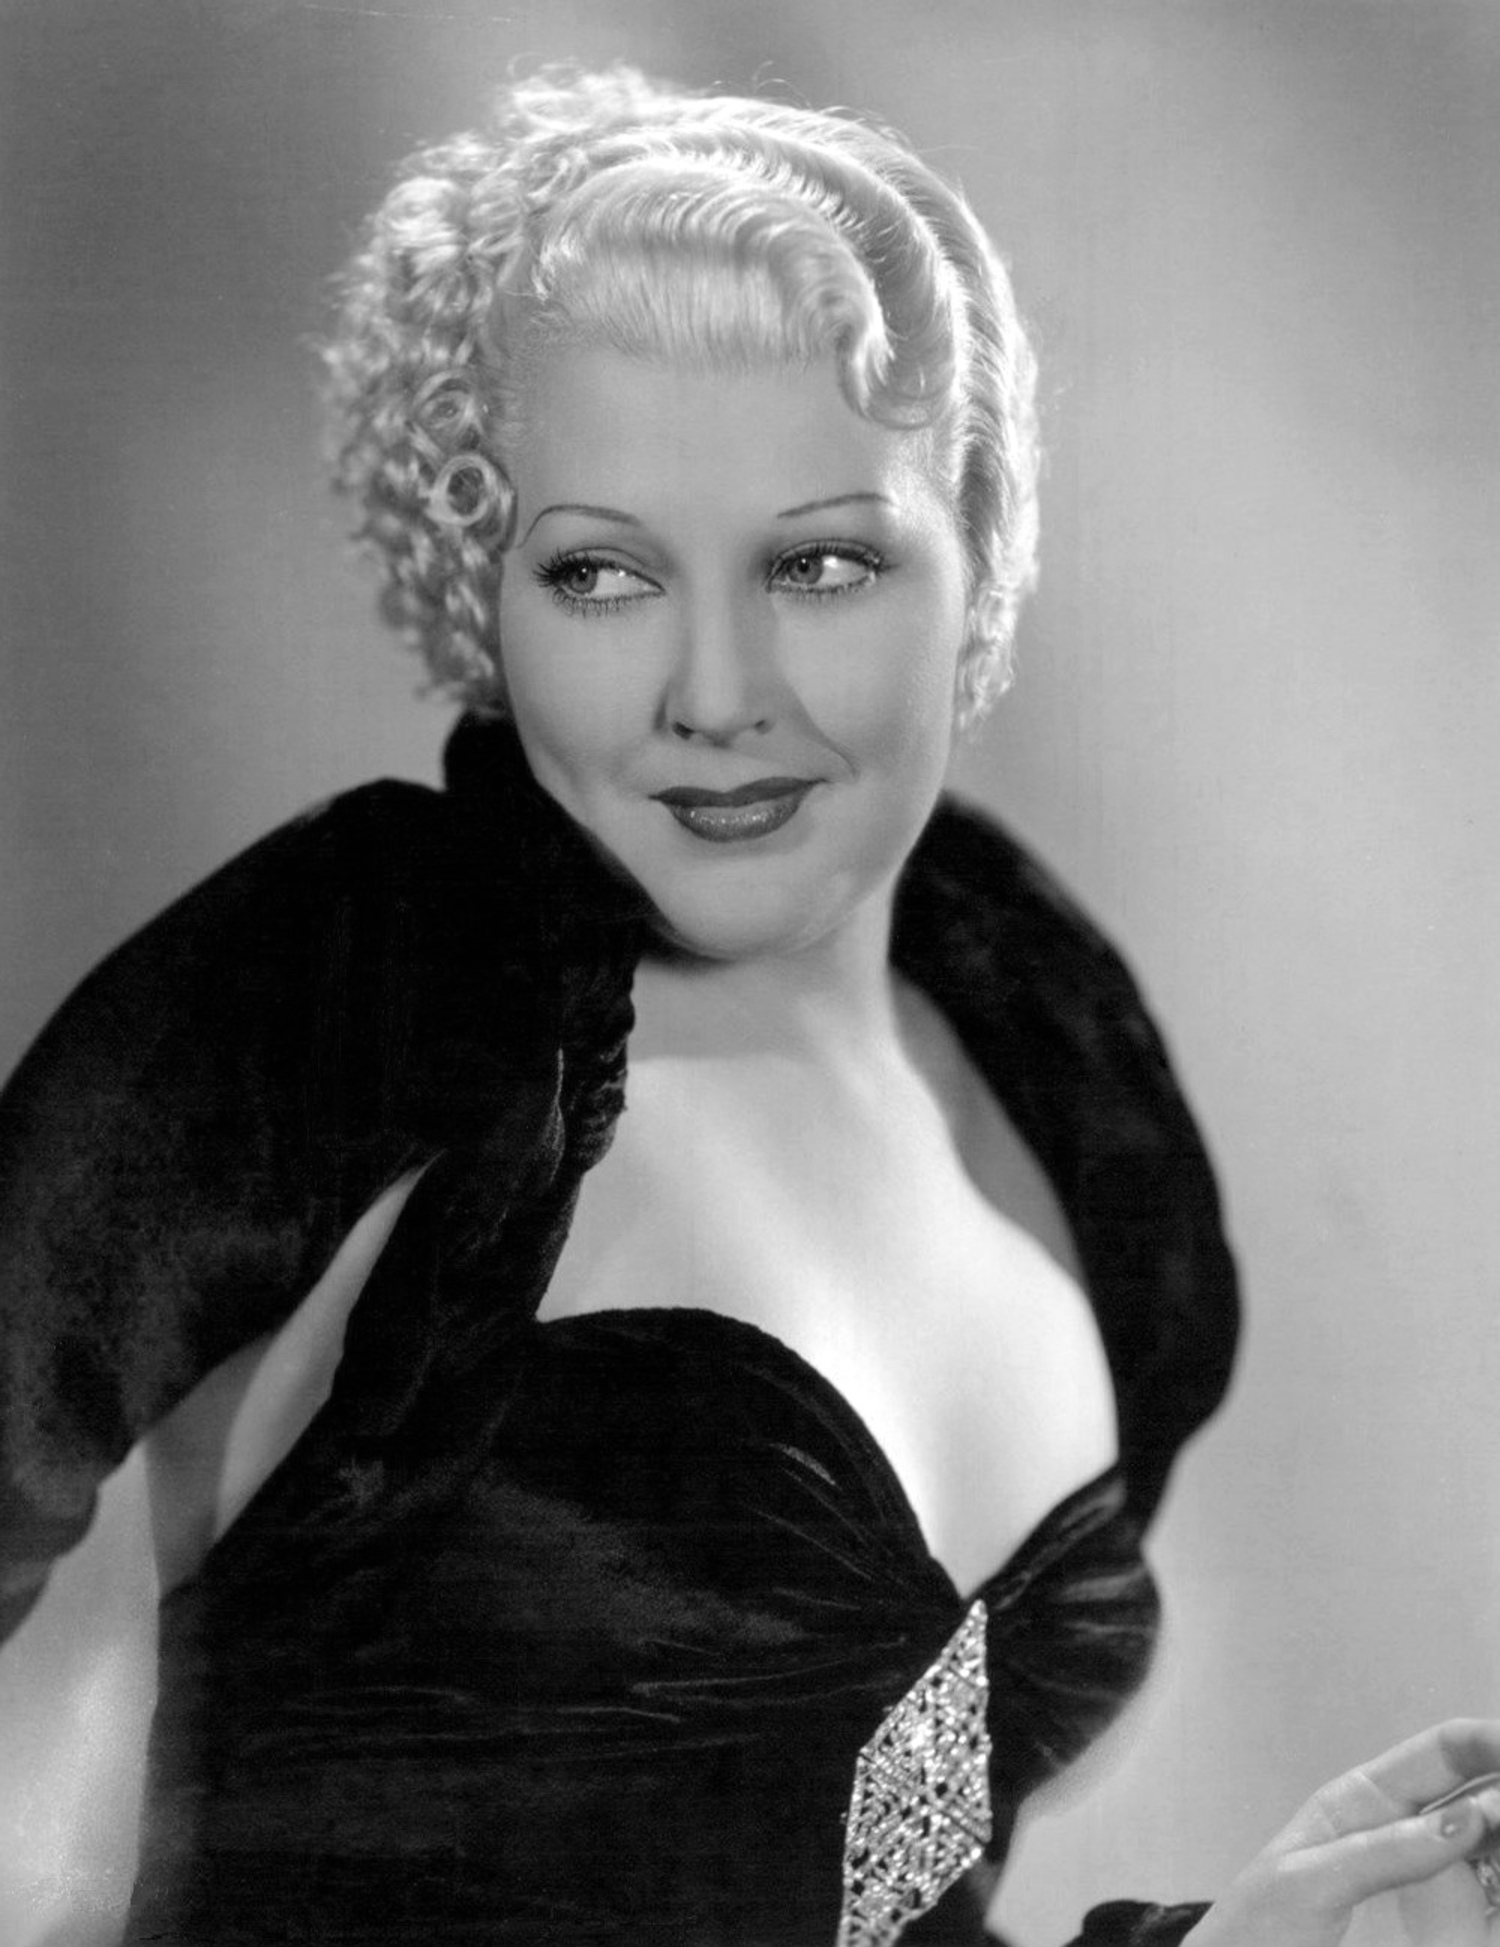 Actress Thelma Todd, who is among the subjects in Jeffrey Sussman's book 